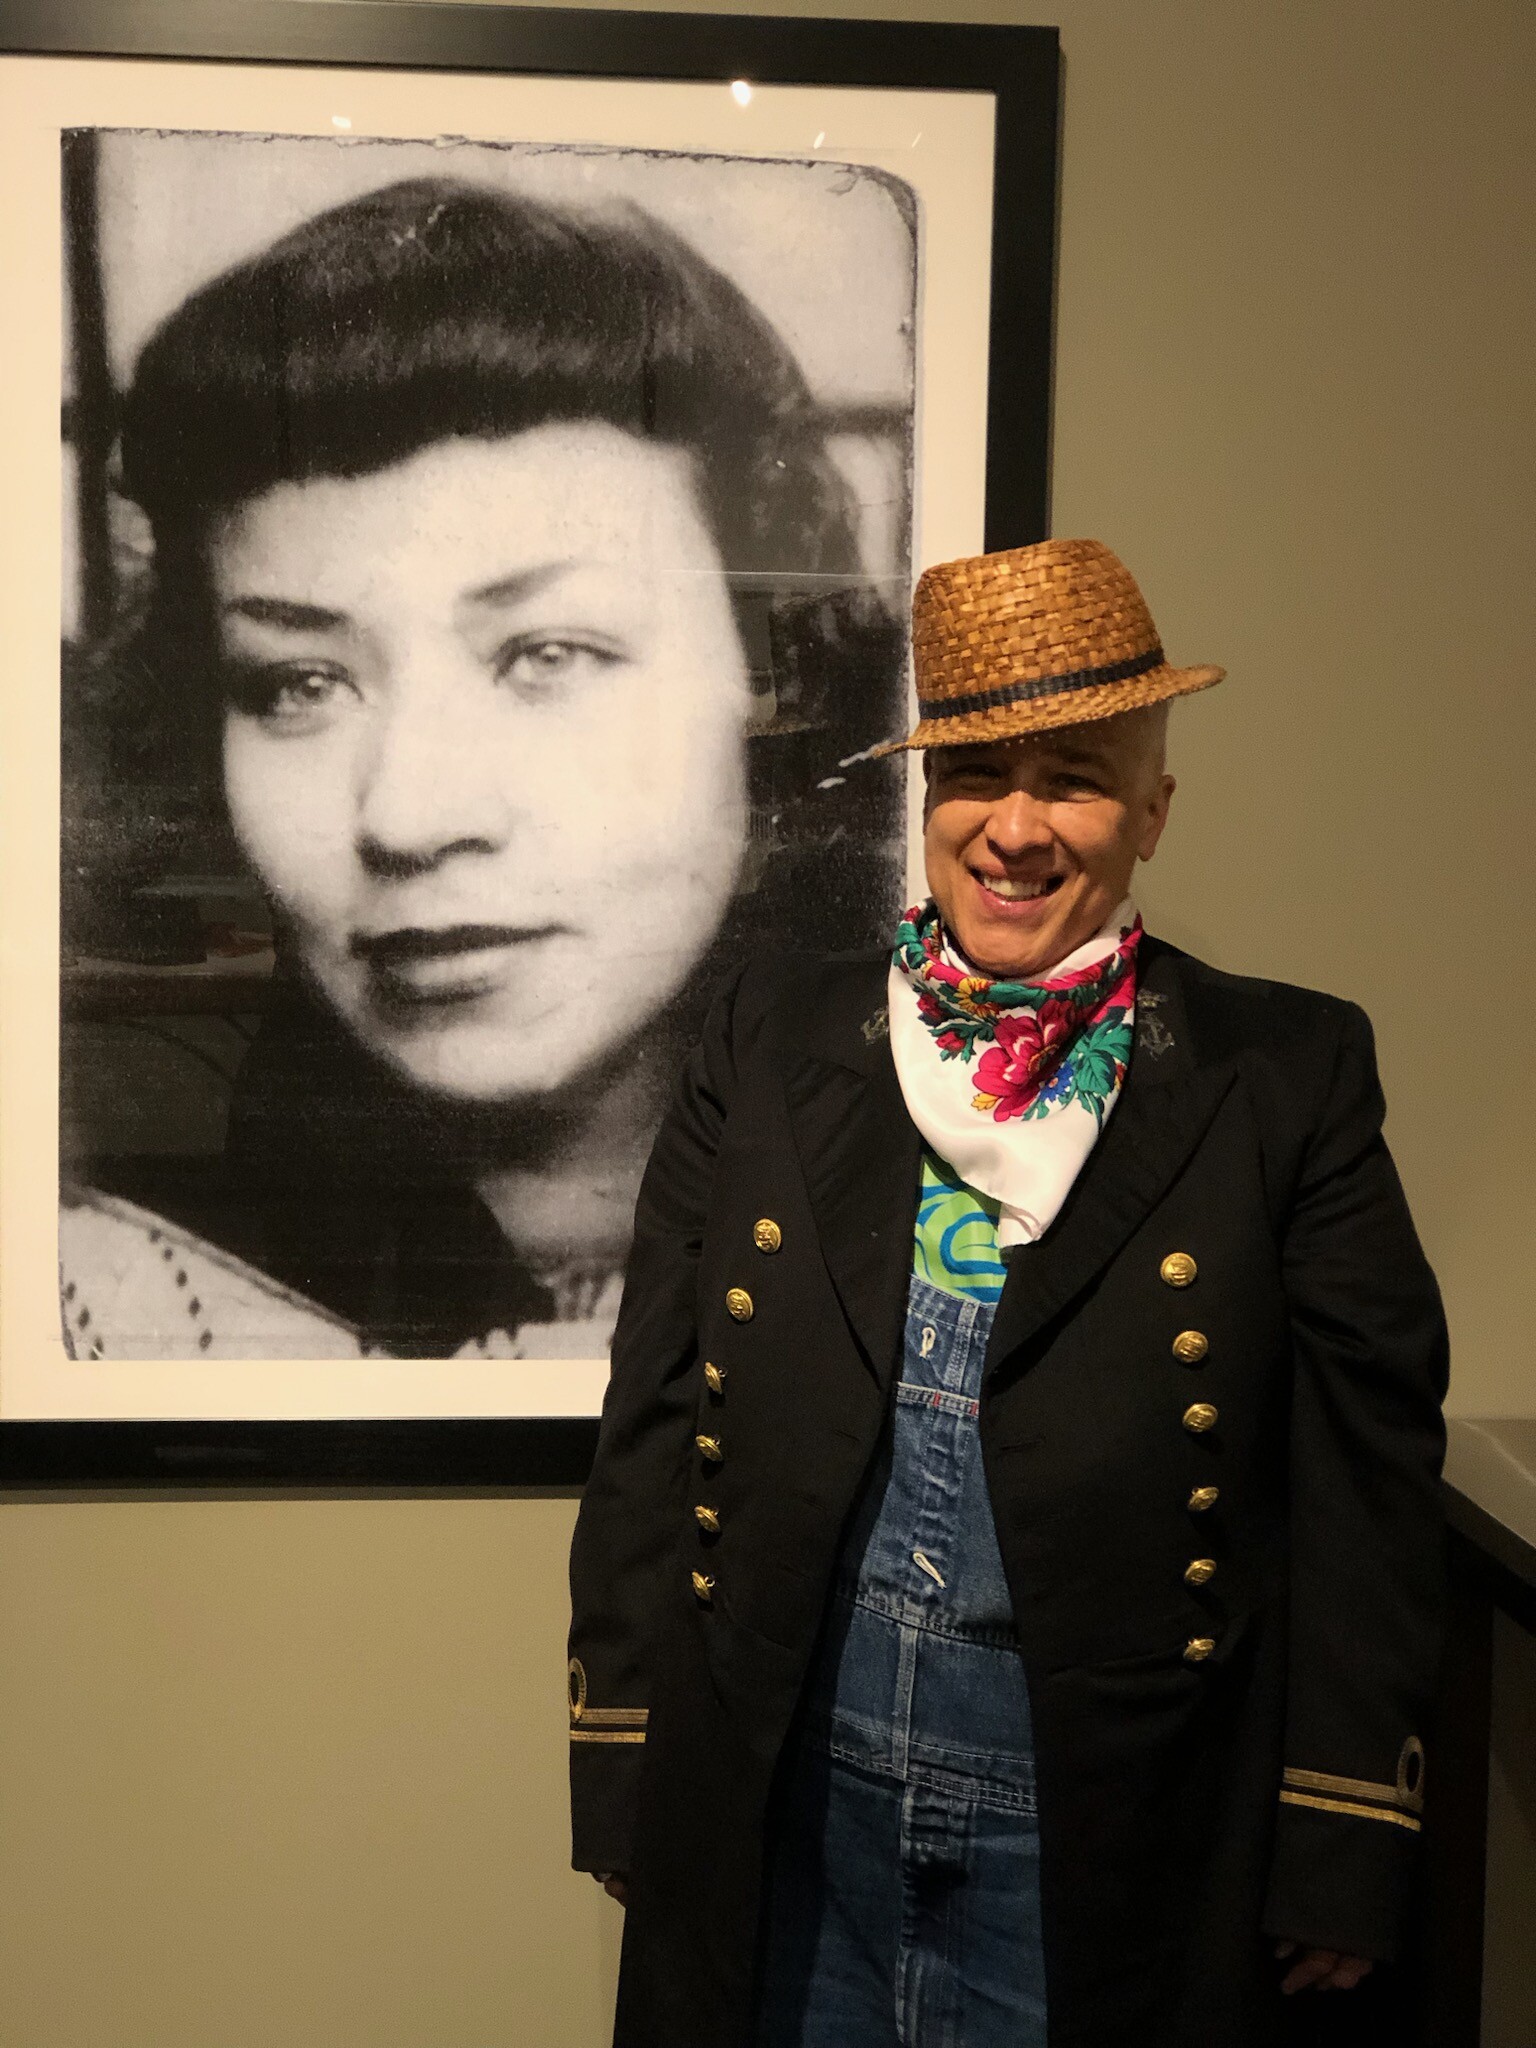 A man in a hat stands next to a portrait of a woman hanging on the wall behind him.